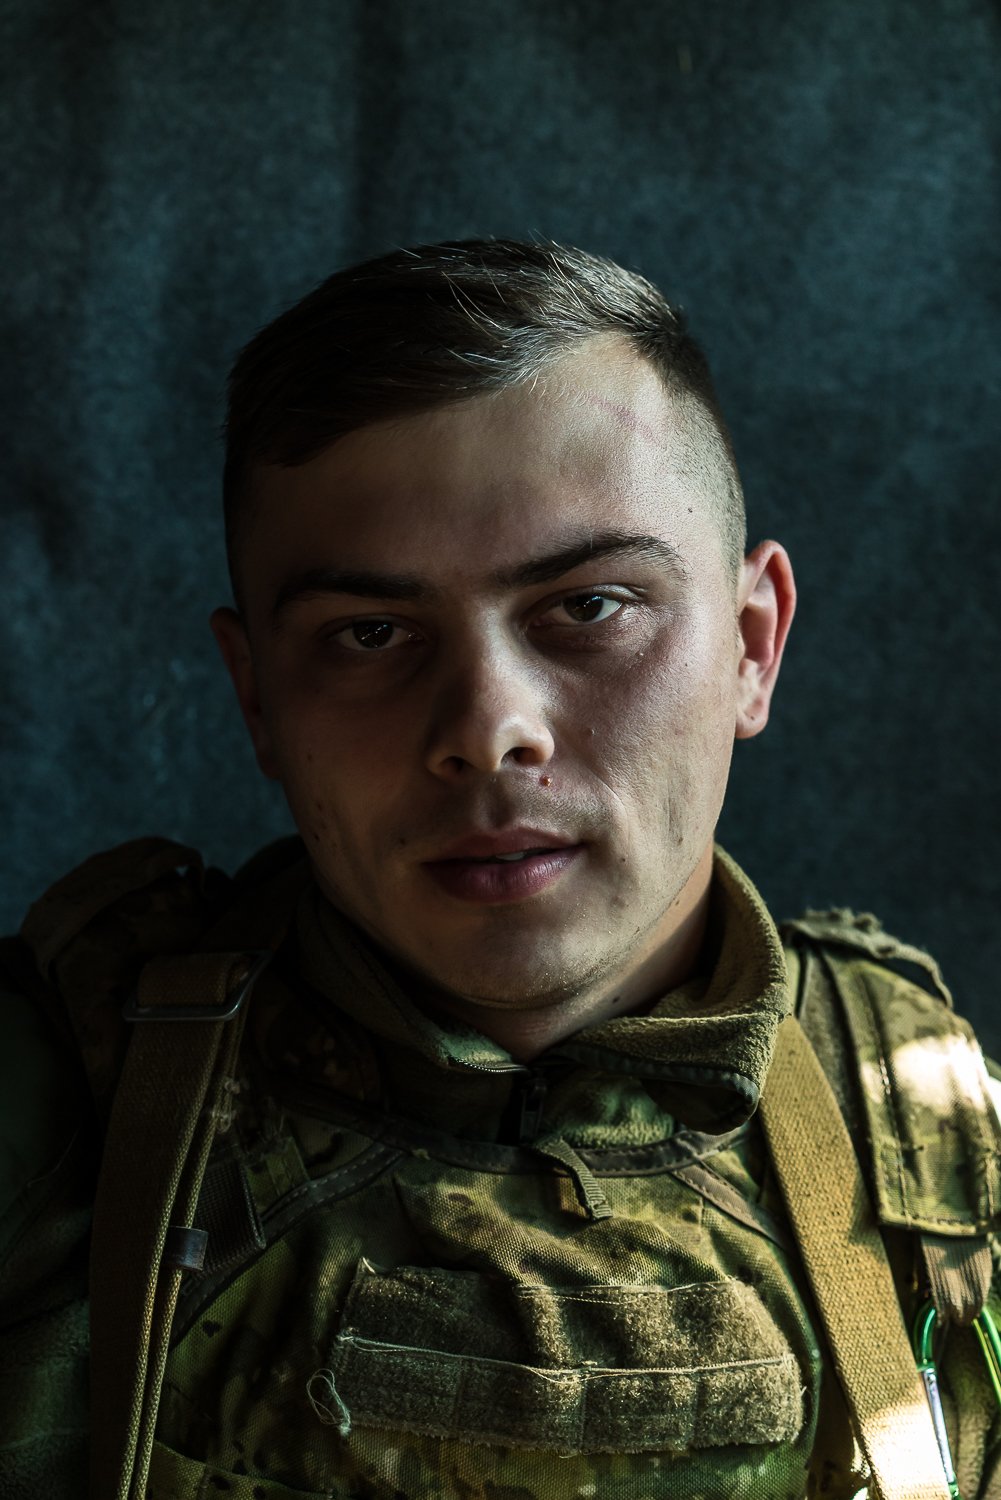  Oleksandr, 23, poses for a portrait in the bunker from which he monitors Russian-backed separatist forces from their respective disengagement positions on Friday, October 18, 2019 in Stanytsia Luhanska, Ukraine. 